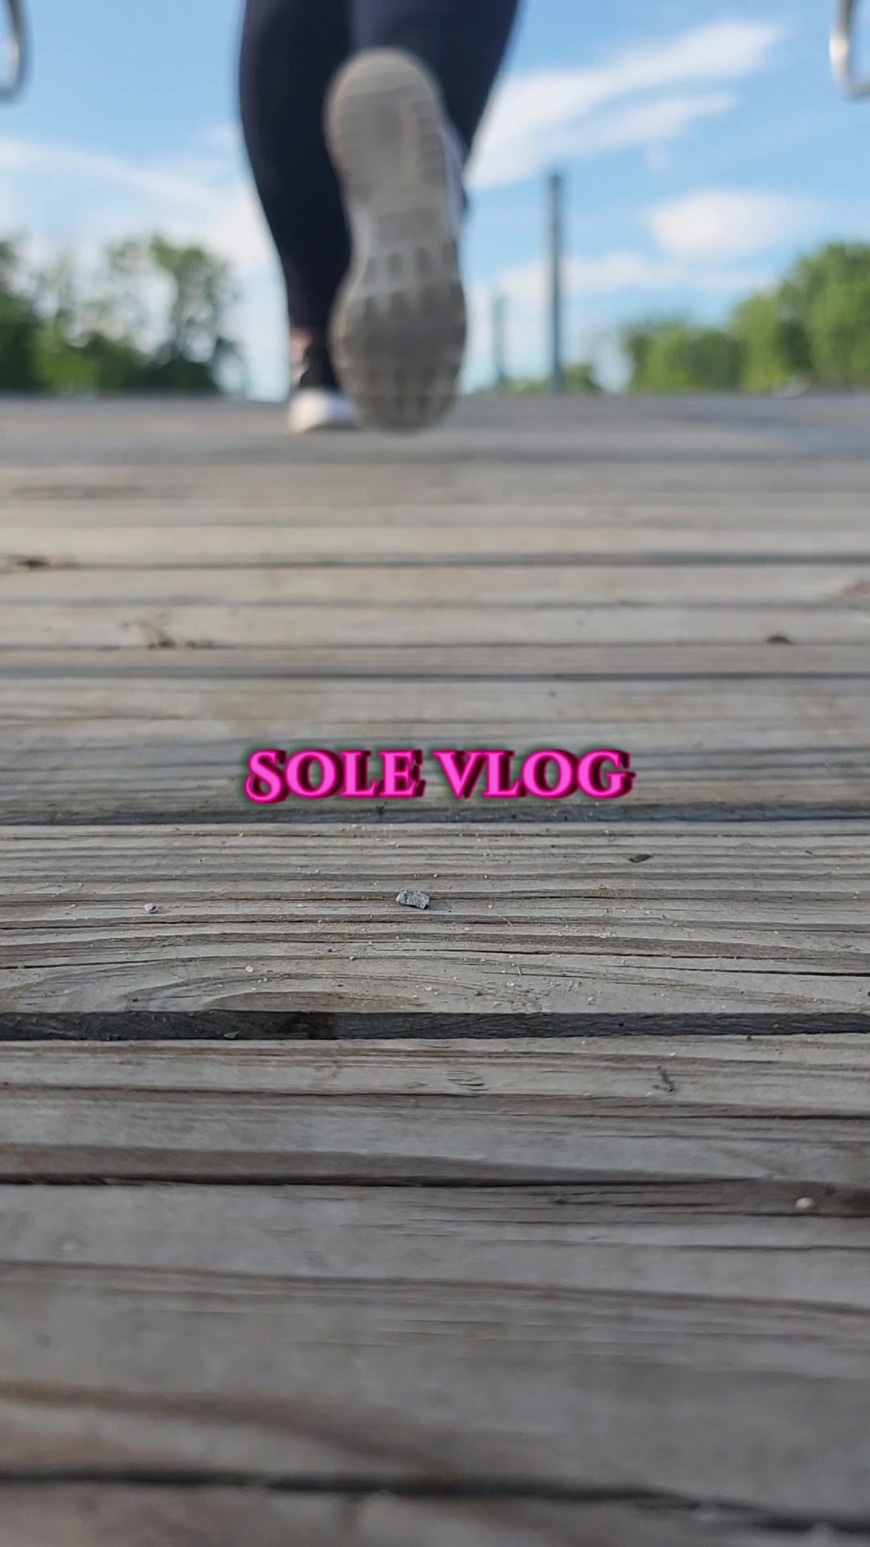 Sole Vlog - Gym Shoe Sole Vlog - clip coverforeground